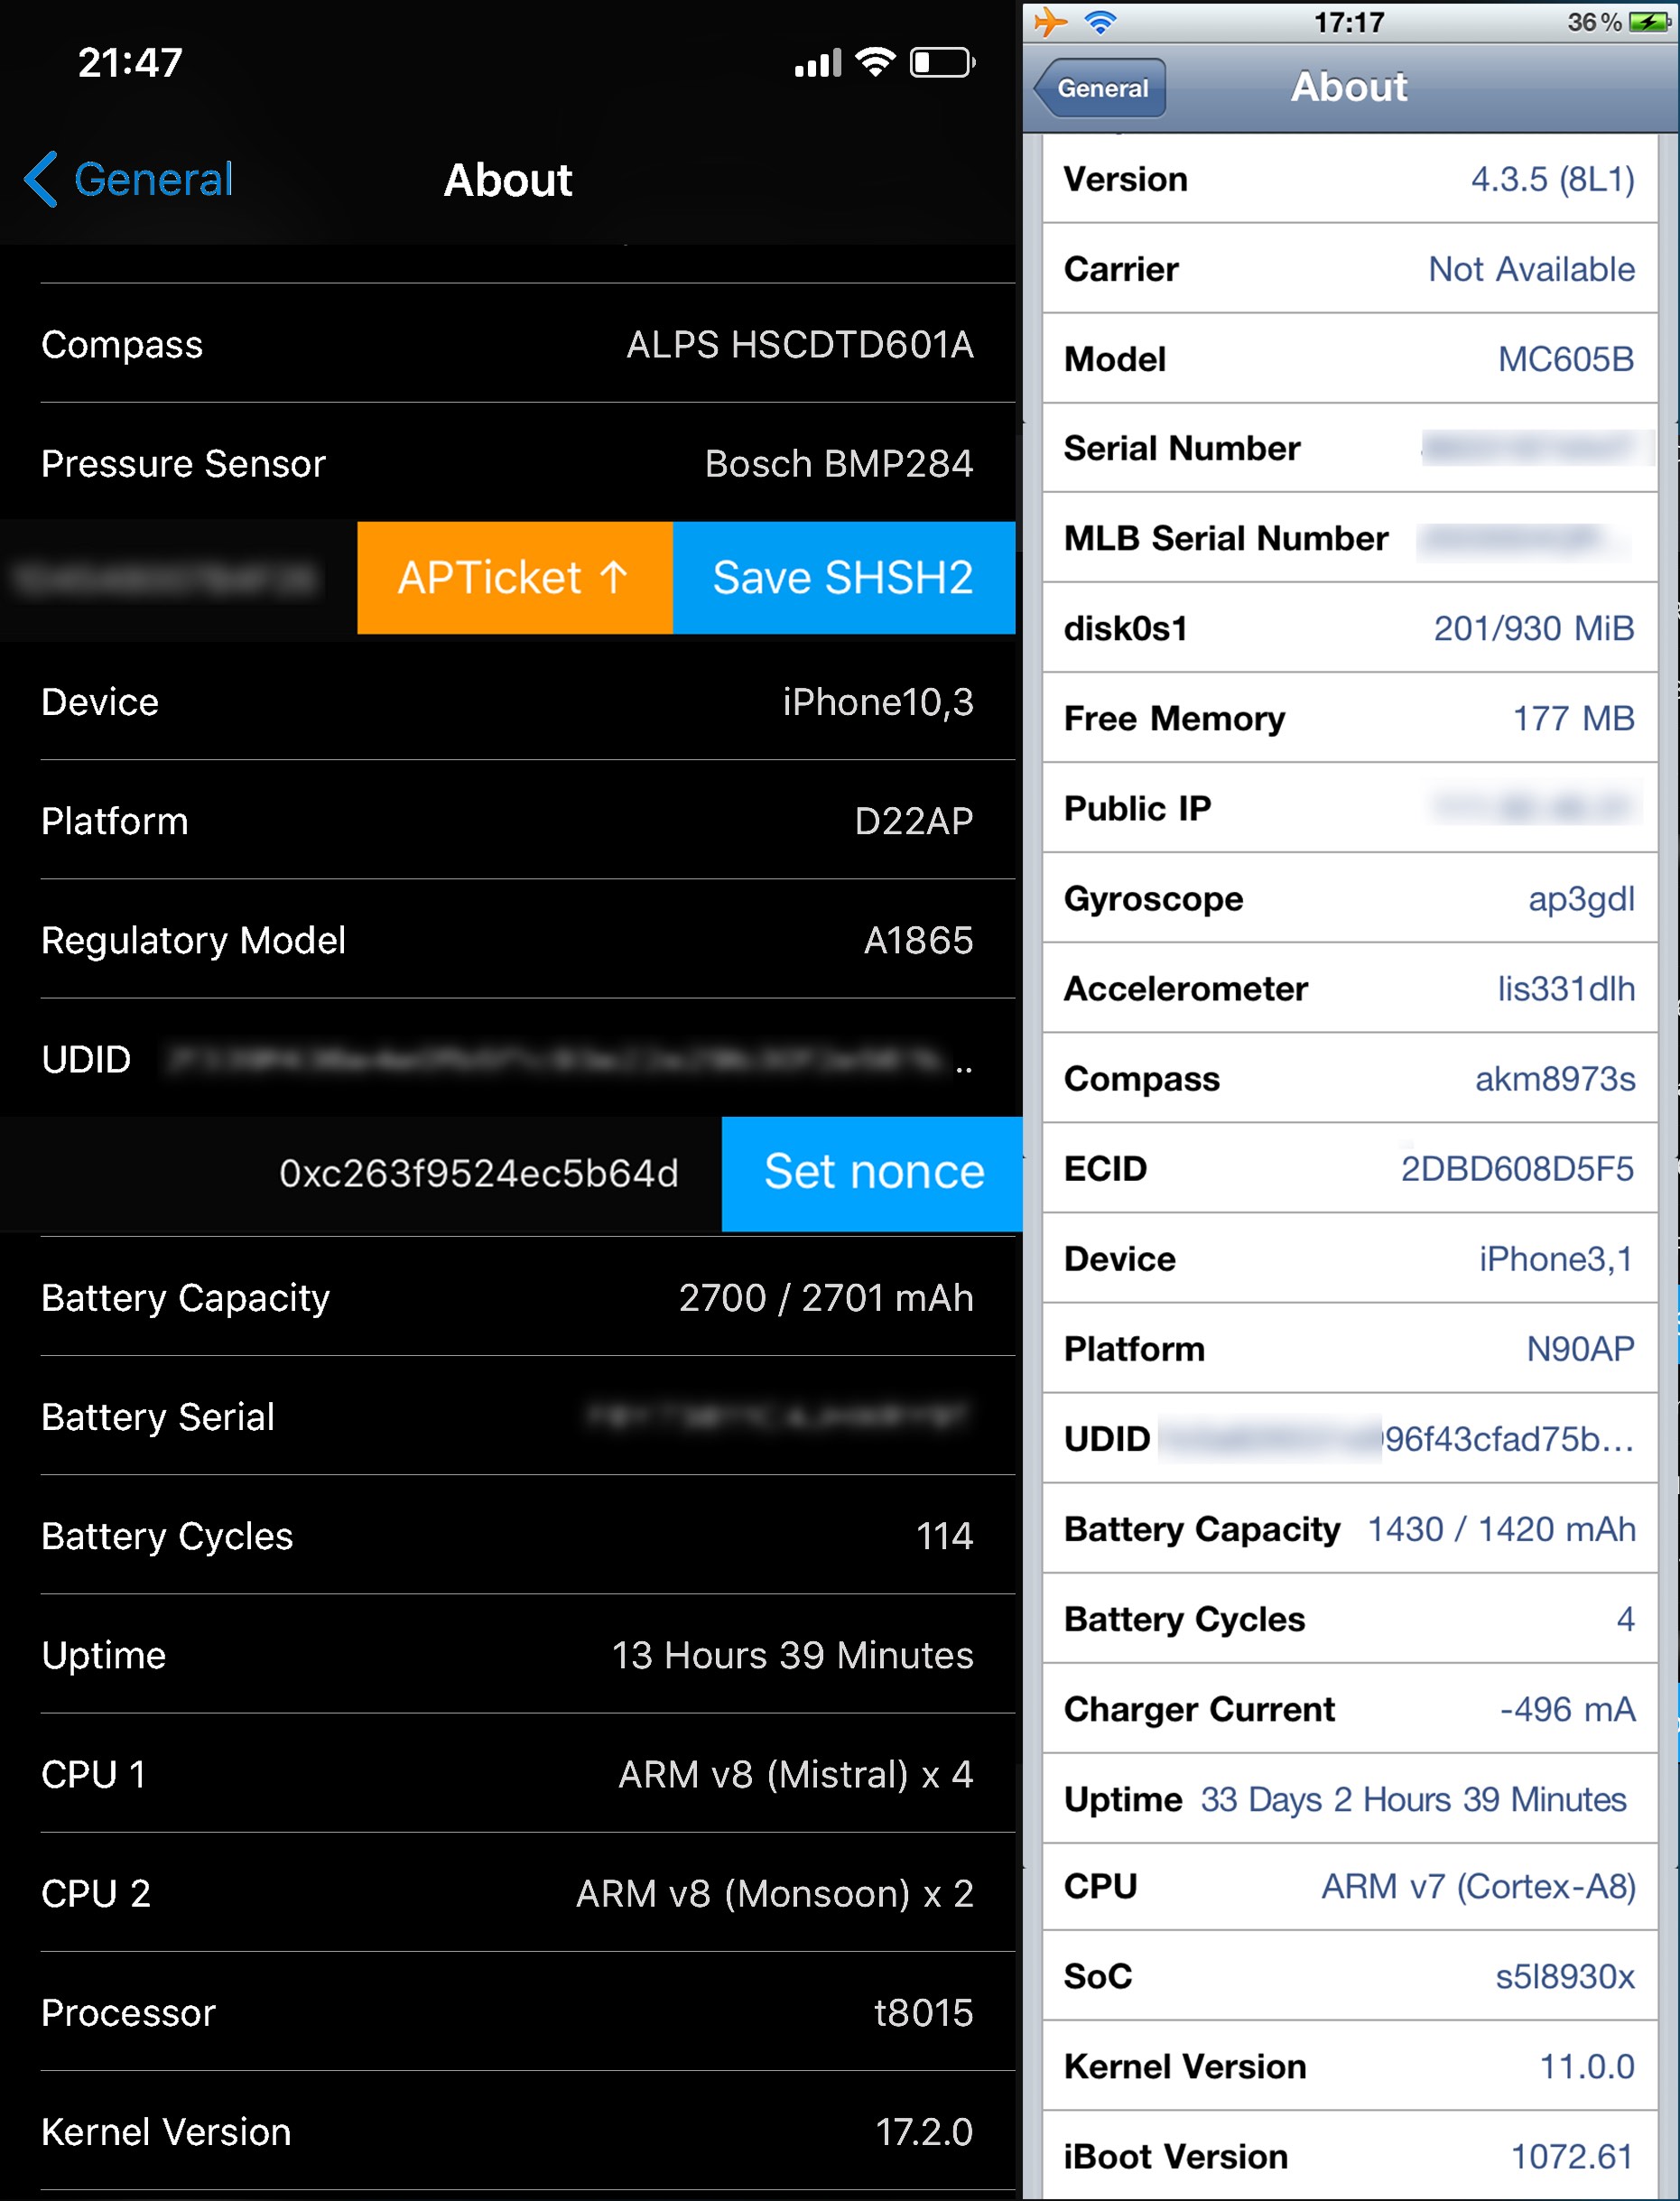 check iphone status with ecid number